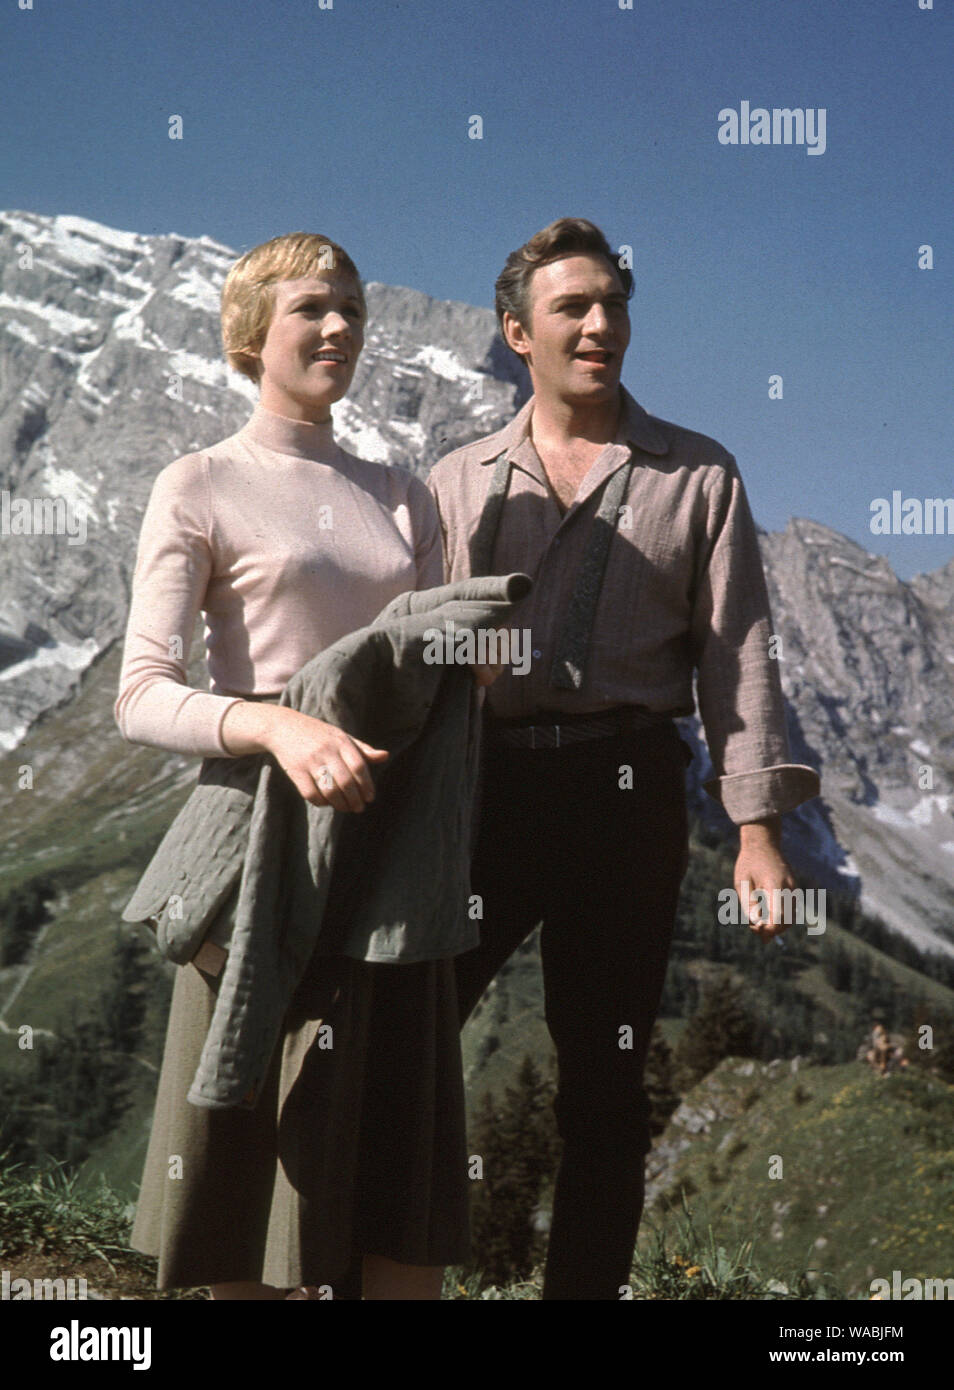 Julie Andrews, Christopher Plummer, 'The Sound of Music' (1965) 20th Century Fox  File Reference # 33848-022THA Stock Photo